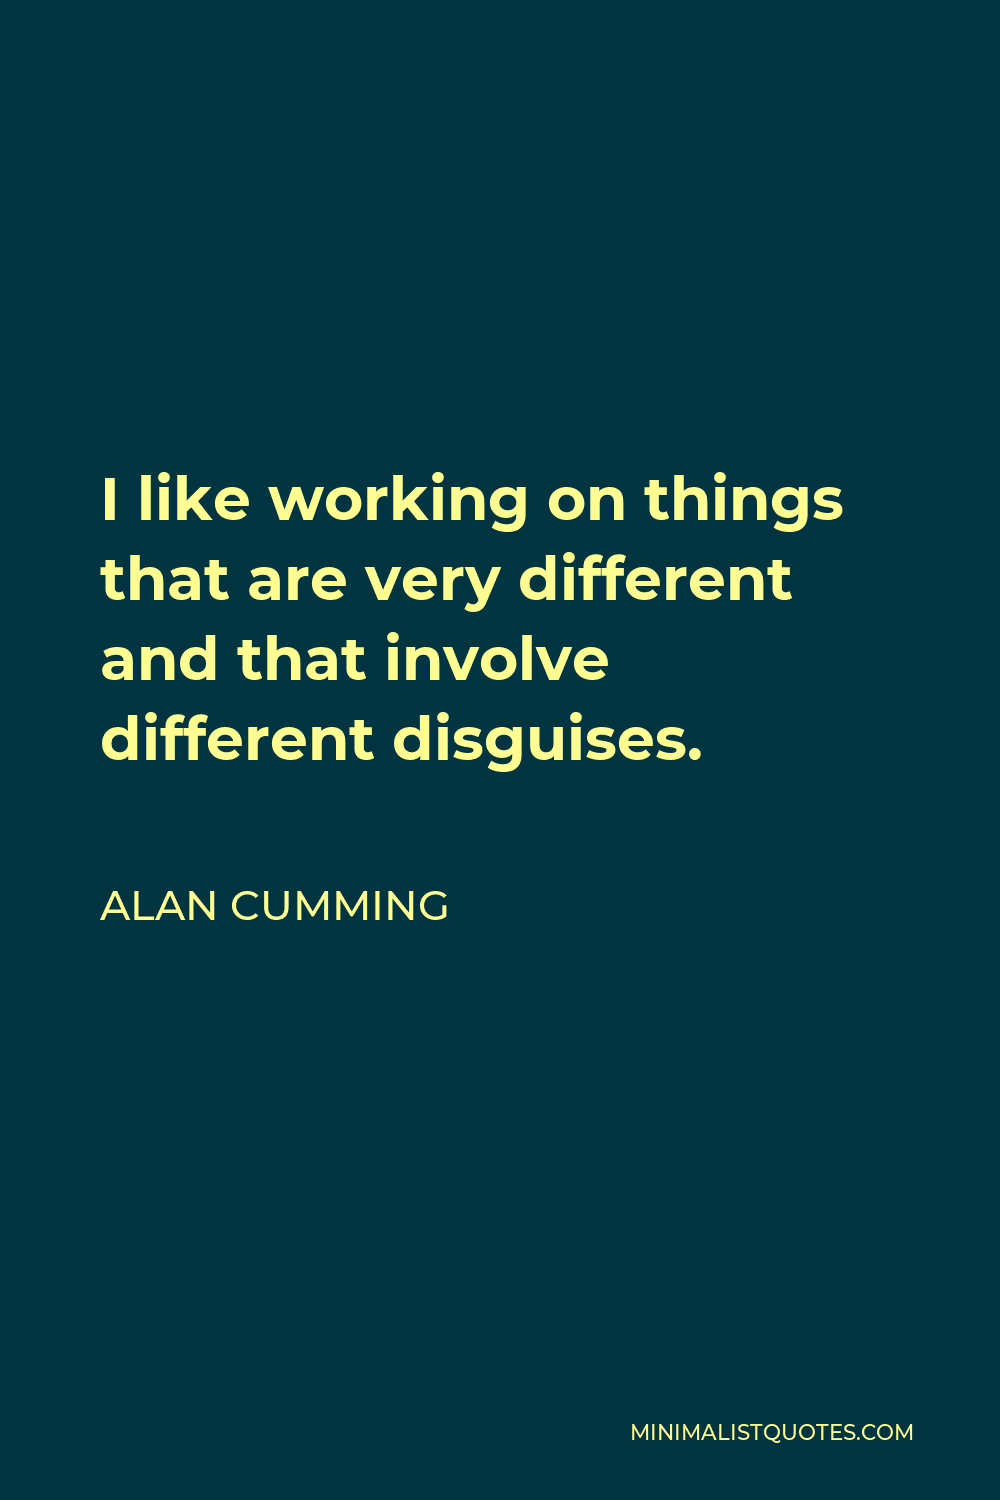 Alan Cumming Quote - I like working on things that are very different and that involve different disguises.